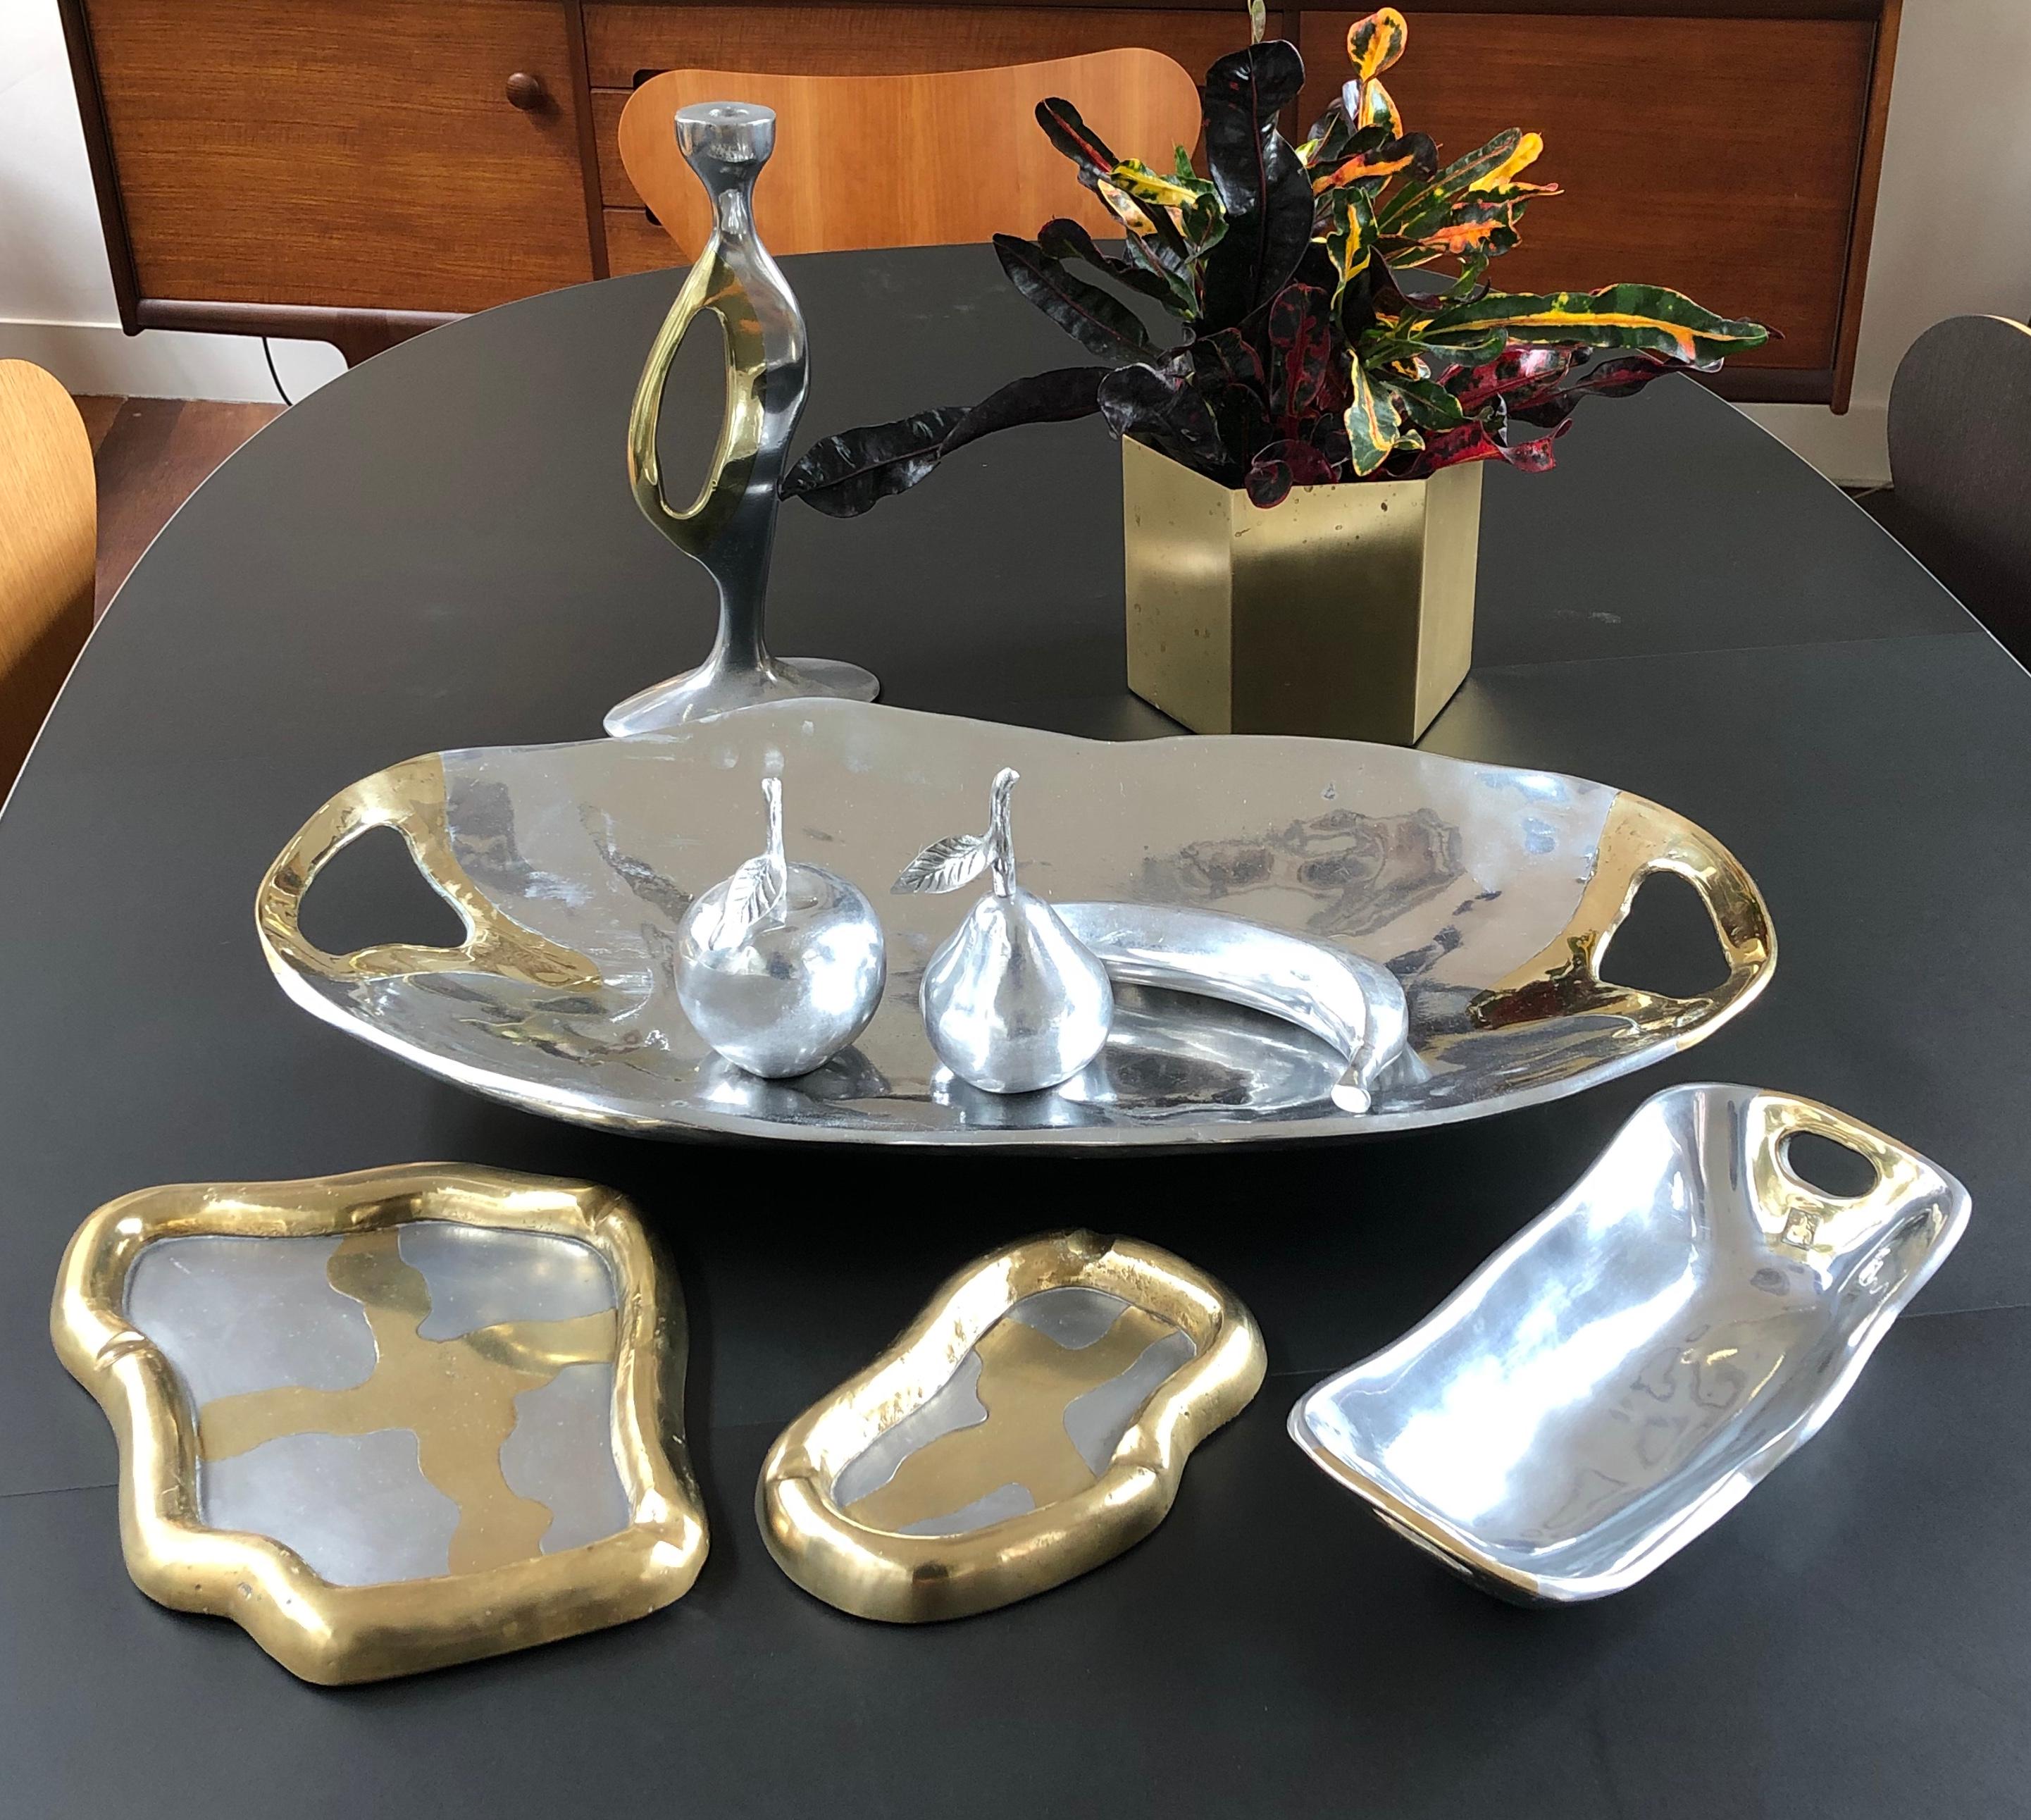 Aluminium and Brass Brutalist Style Tray by David Marshall (1970s) - Large 1